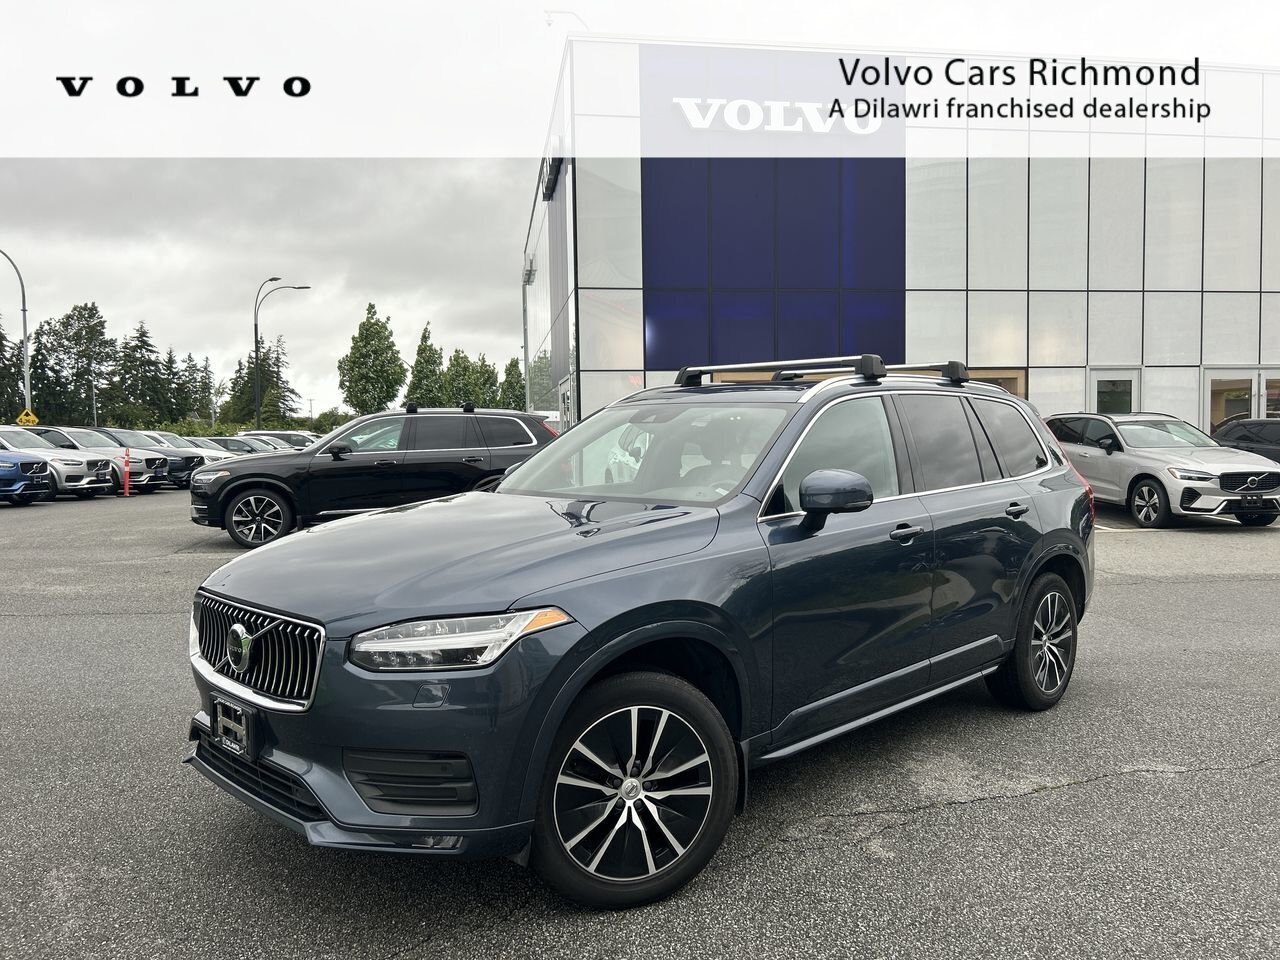 2020 Volvo XC90 T6 AWD Momentum (7-Seat) | Finance from 3.24% OAC 